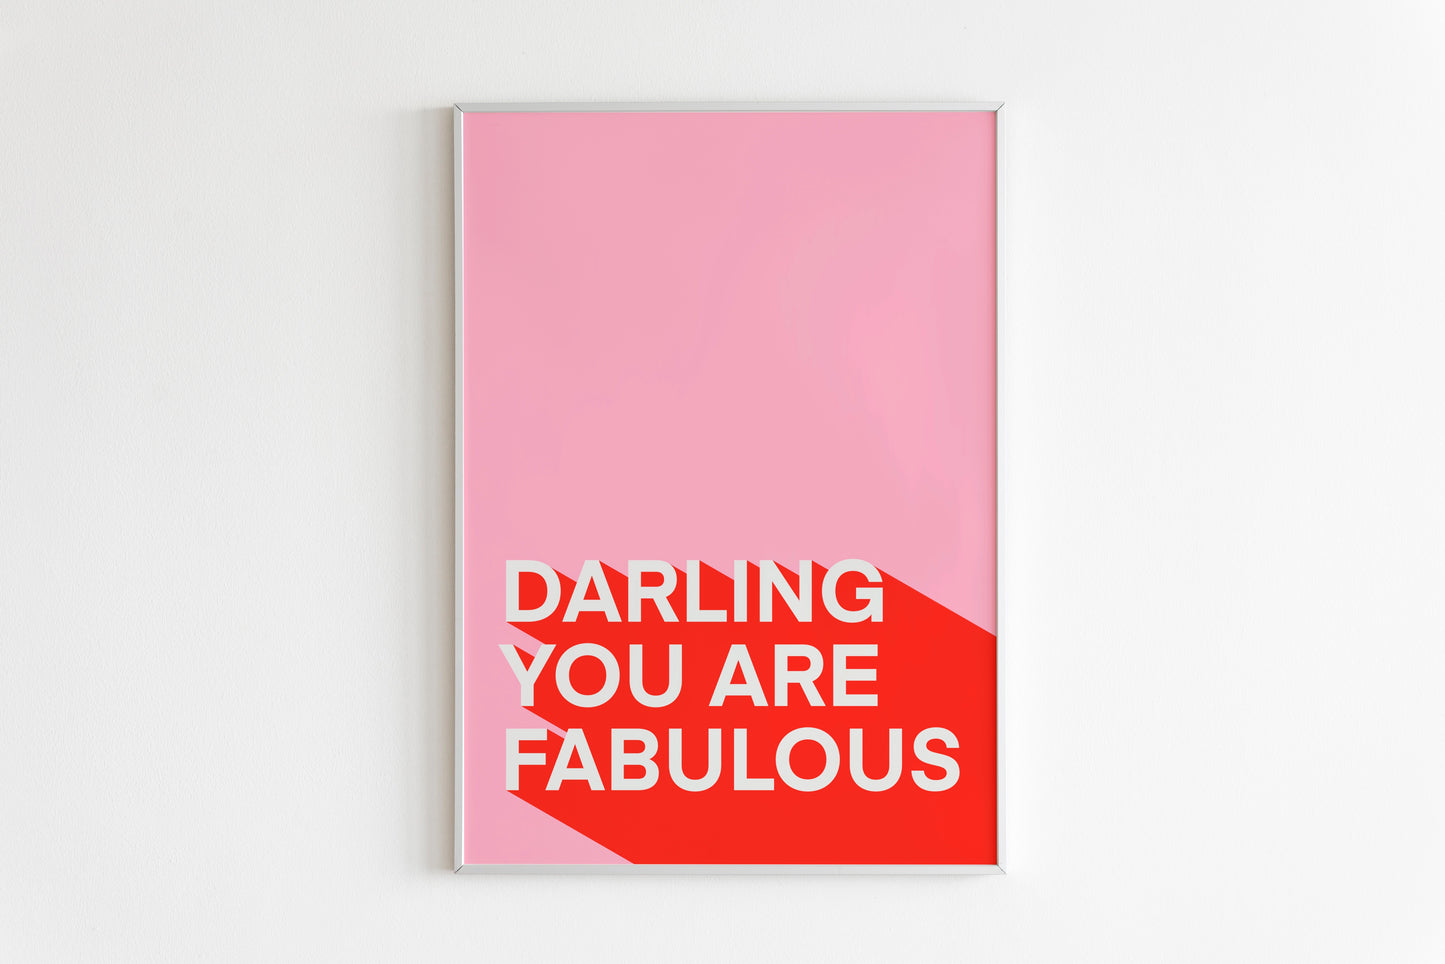 Darling, You Are Fabulous Print in Pink